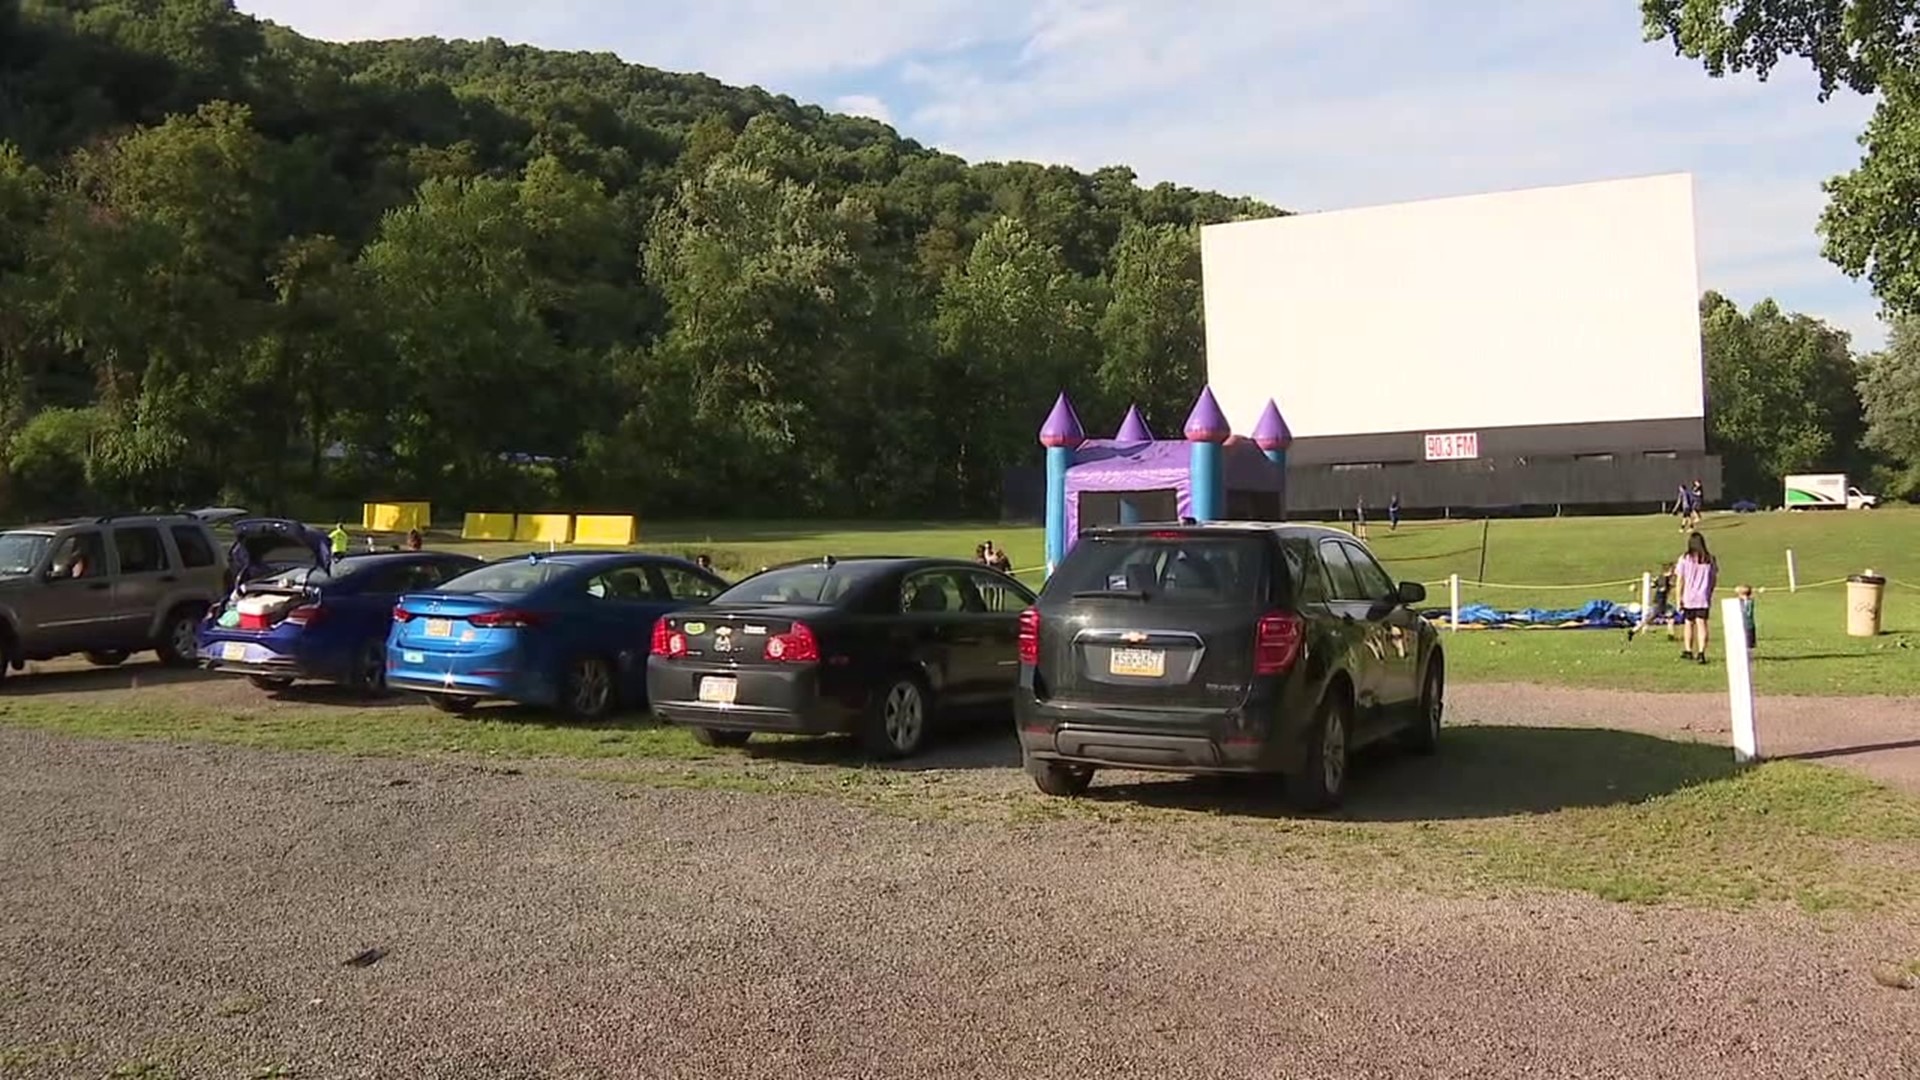 The drive-in held a special anniversary celebration Saturday night.